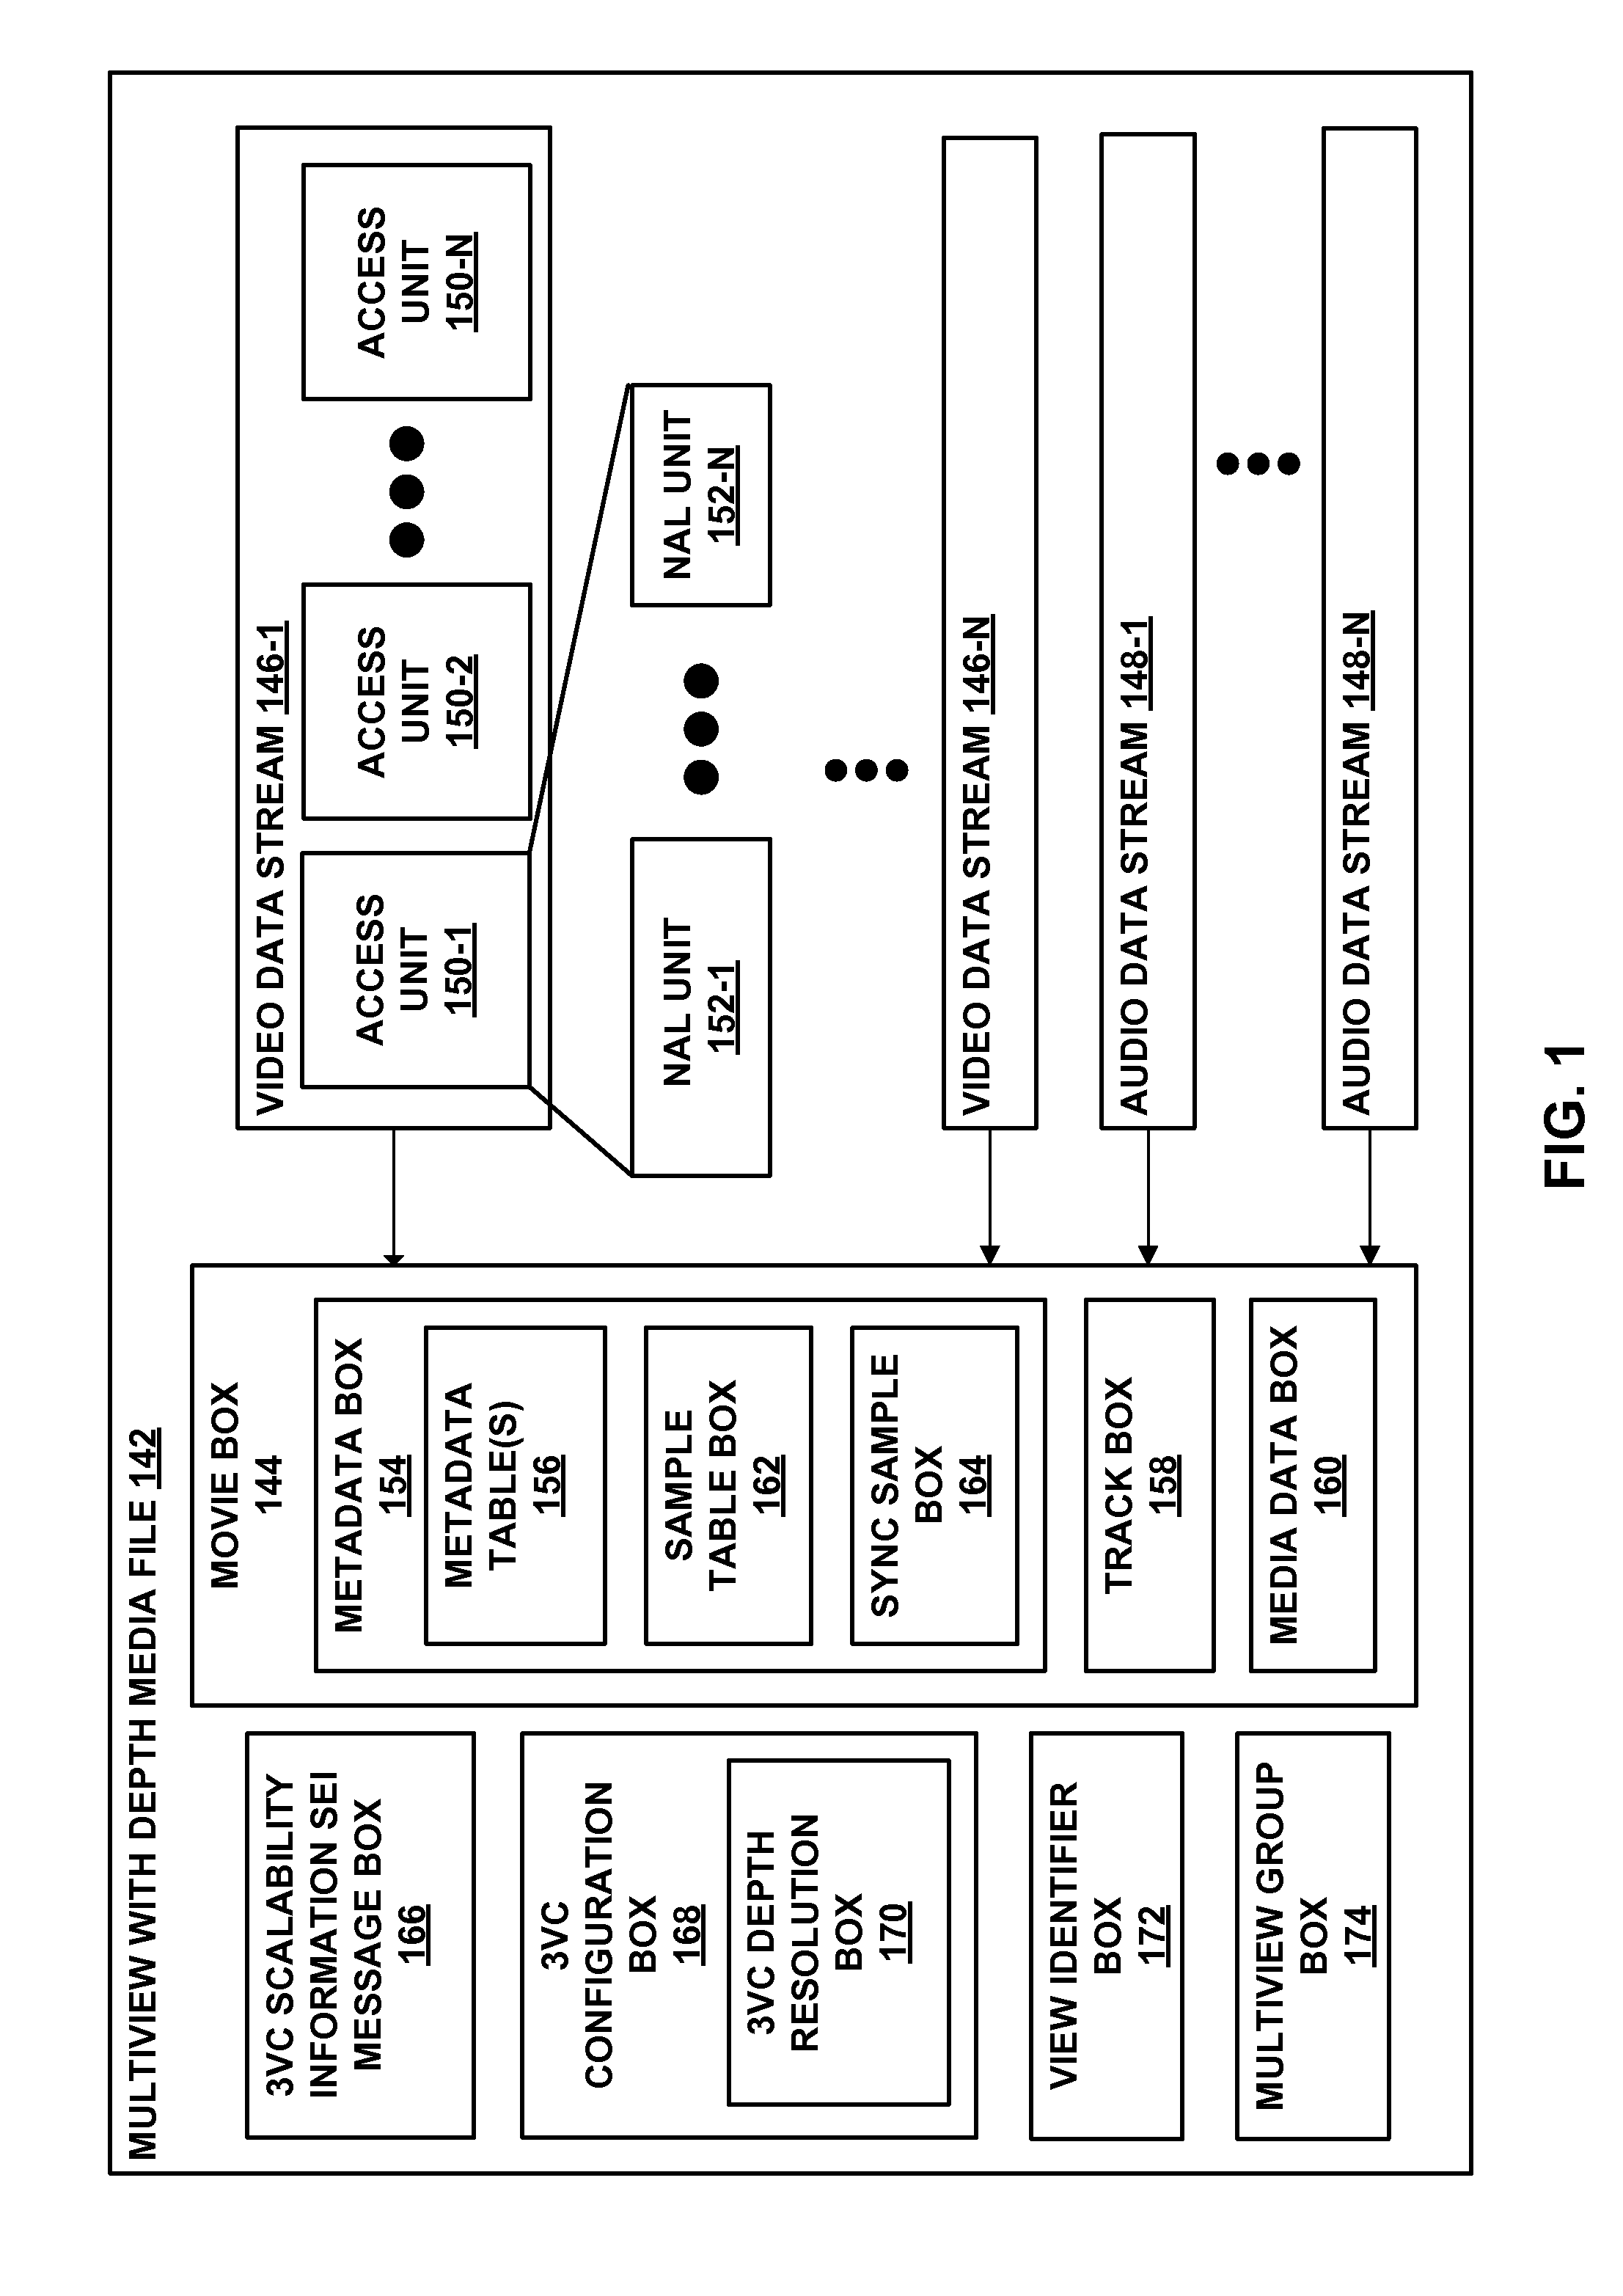 Indication of current view dependency on reference view in multiview coding file format